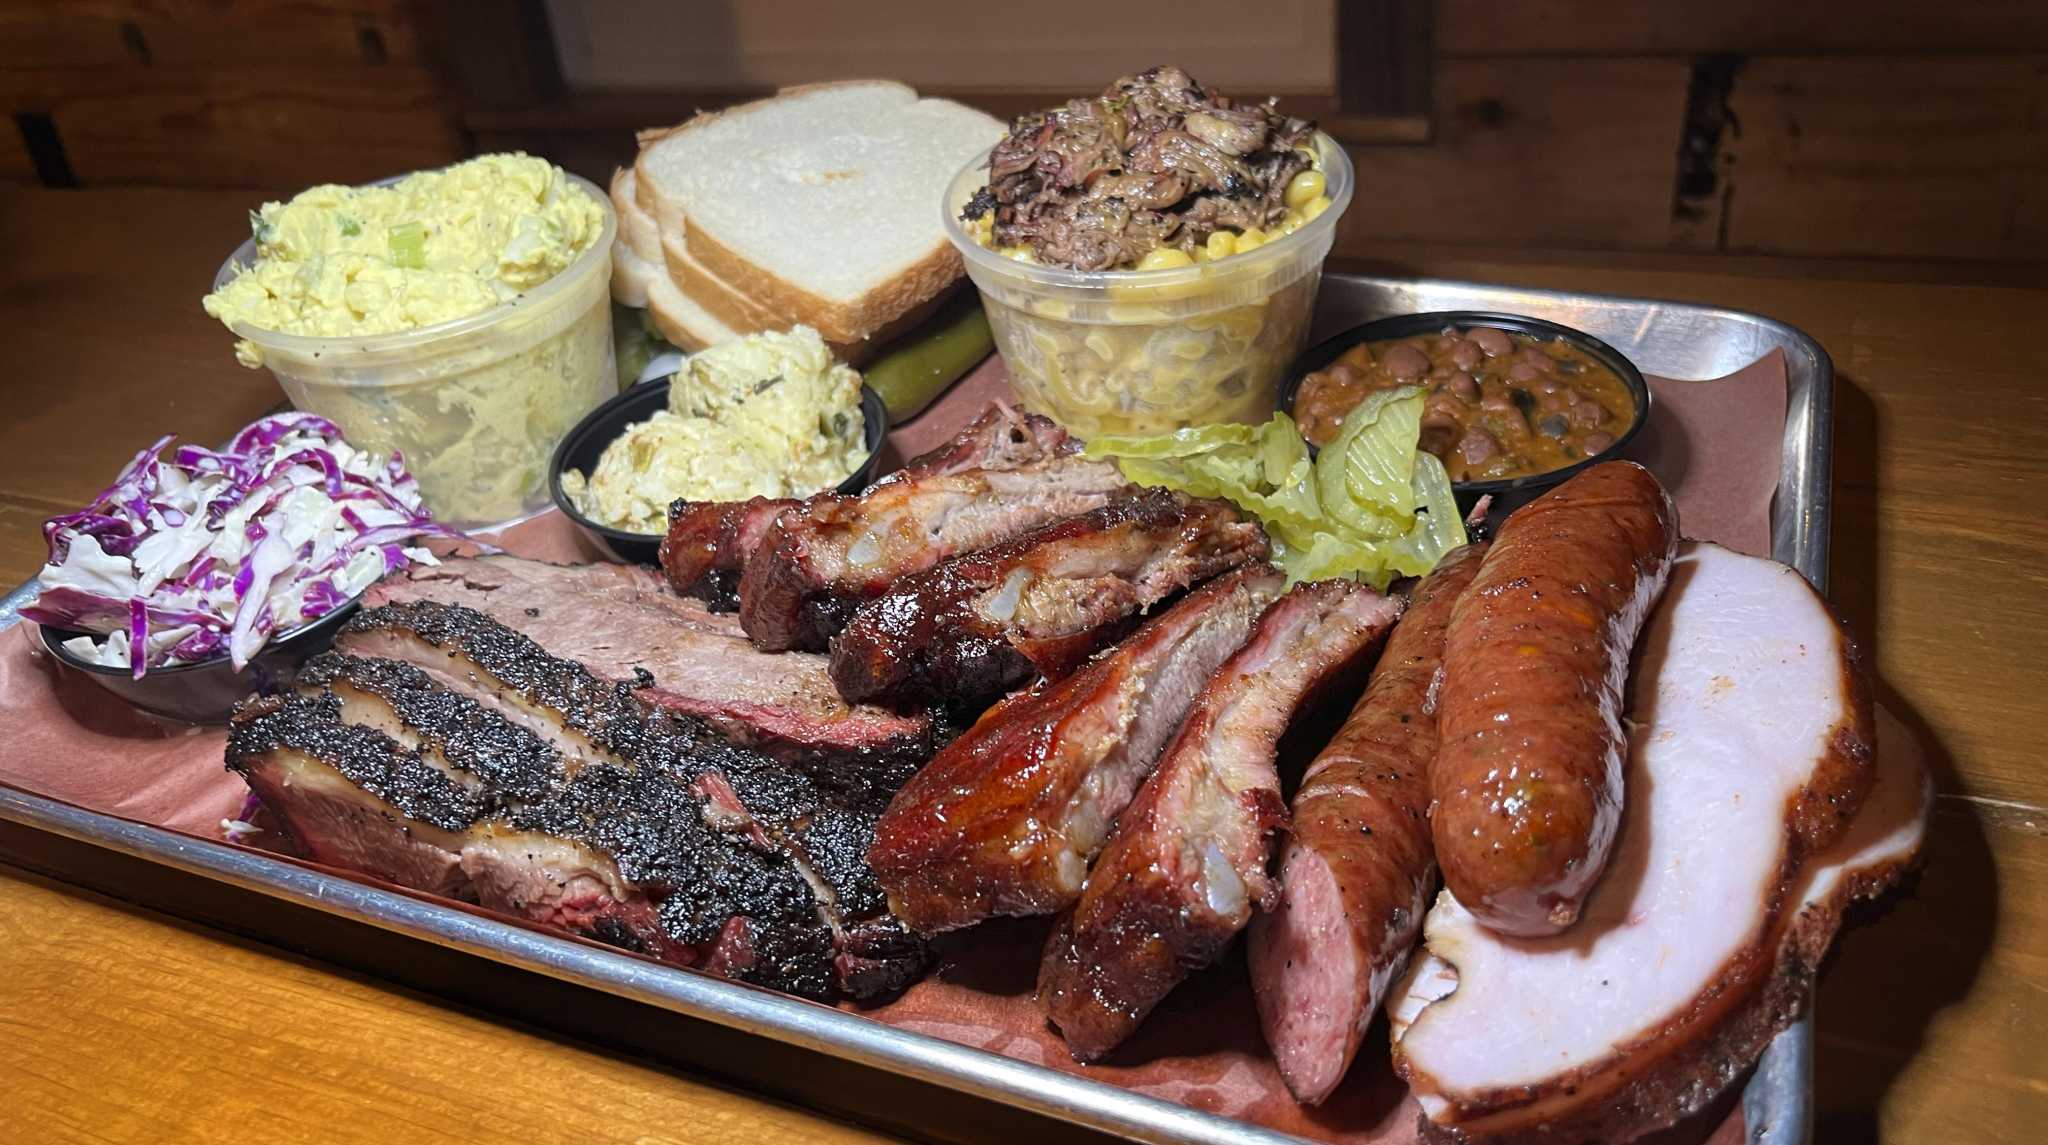 Review At Pinkerton’s Barbecue in downtown San Antonio, the honeymoon